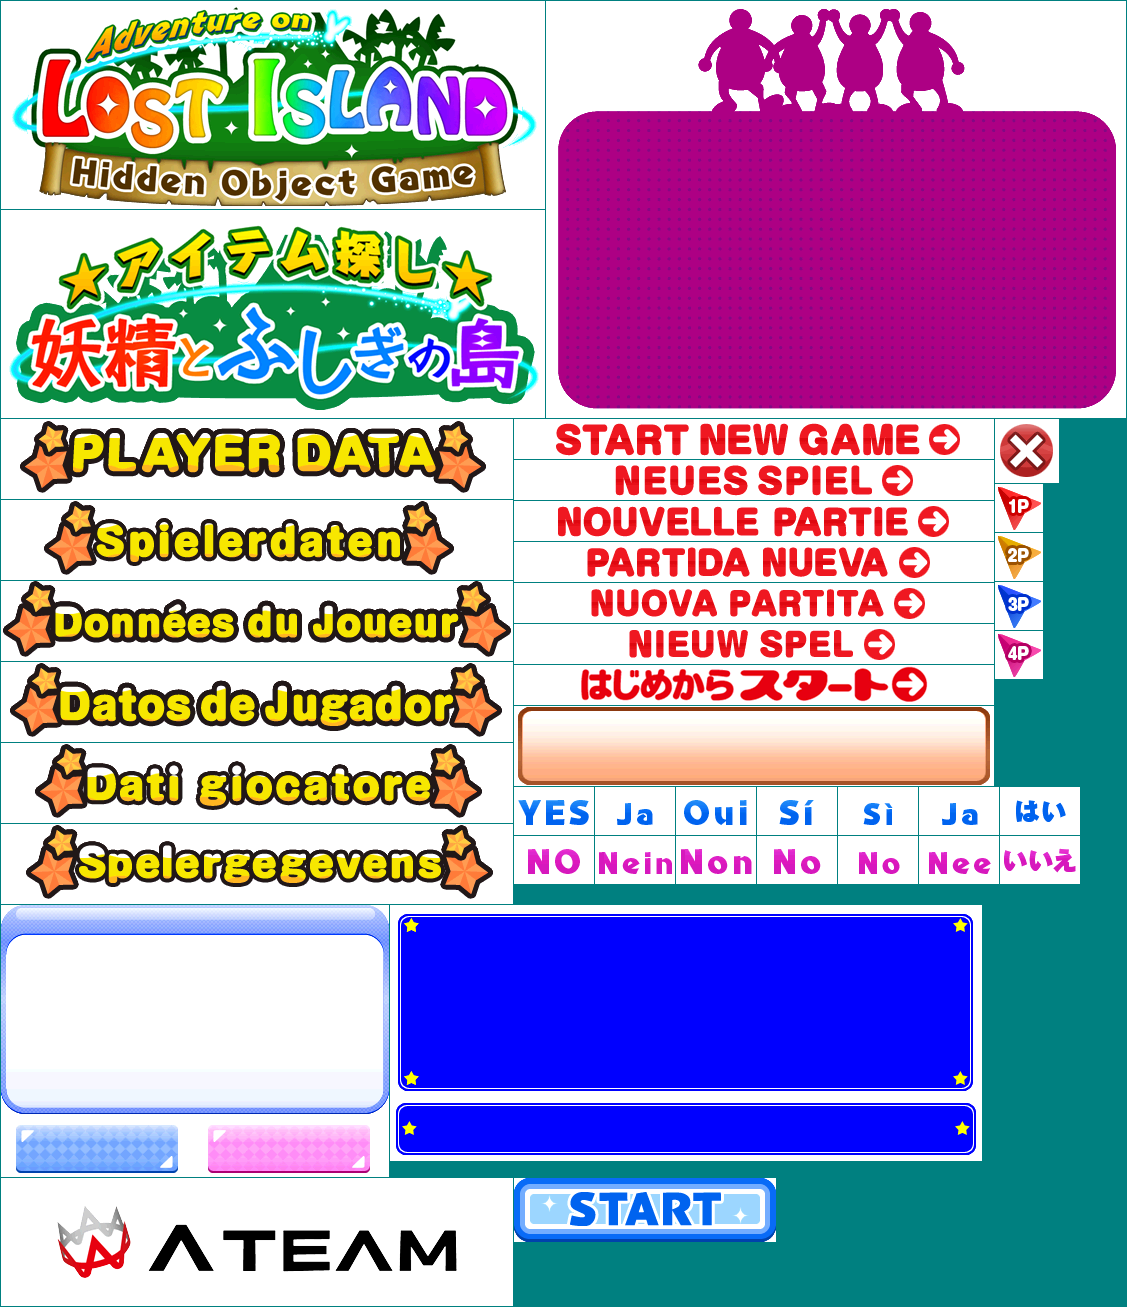 Title Screen & File Selection